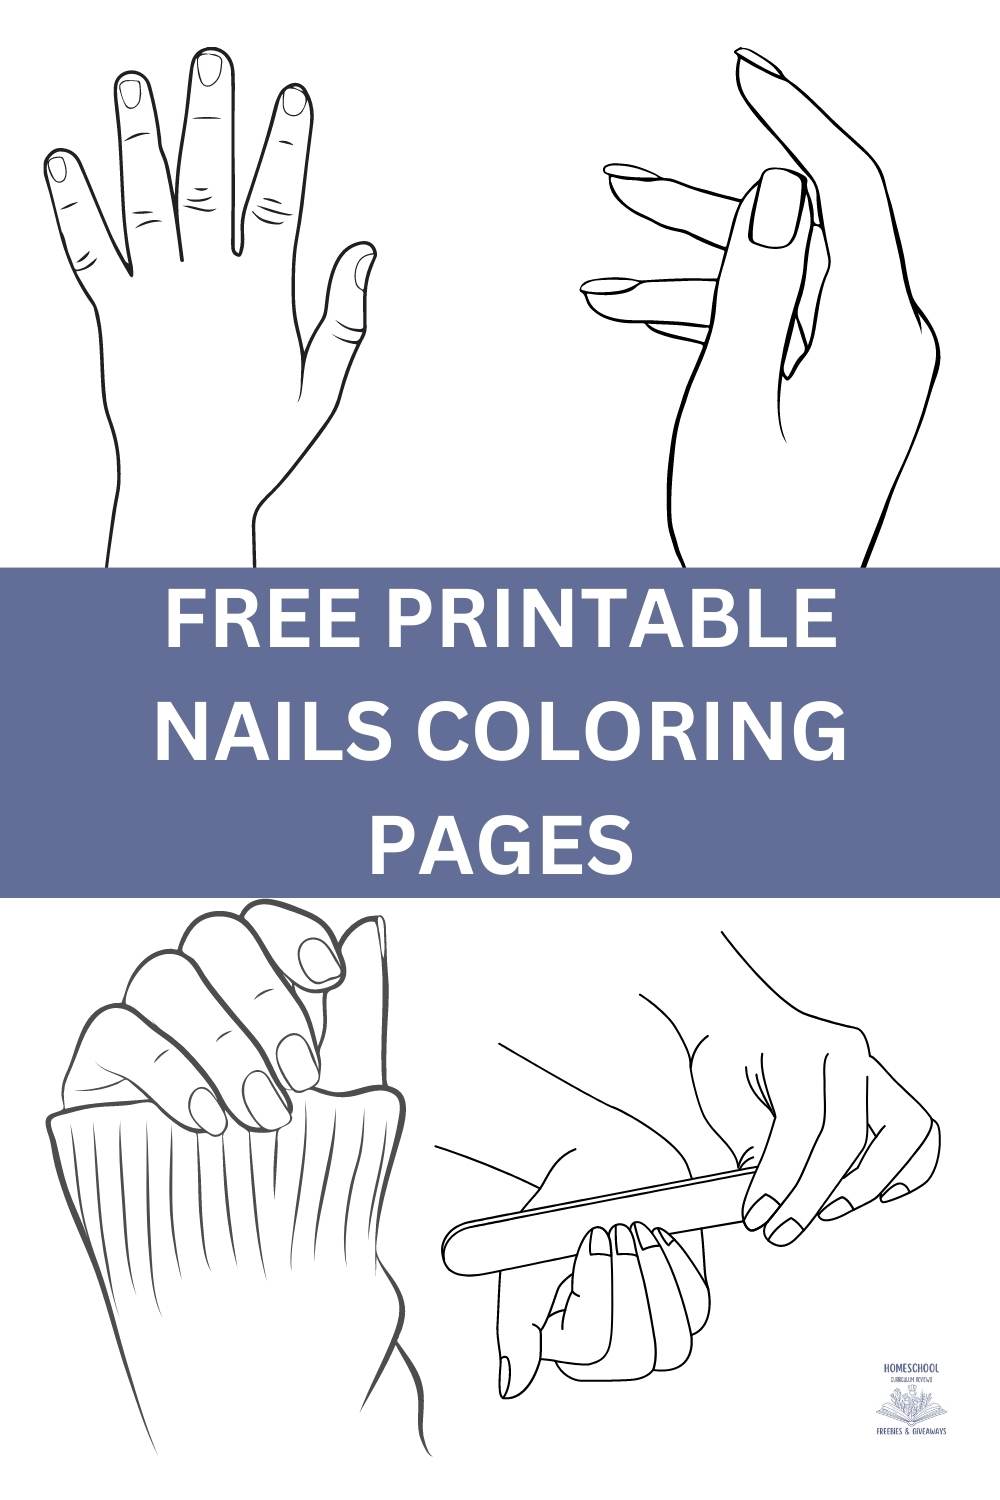 Free printable nails coloring pages for kids or fashion